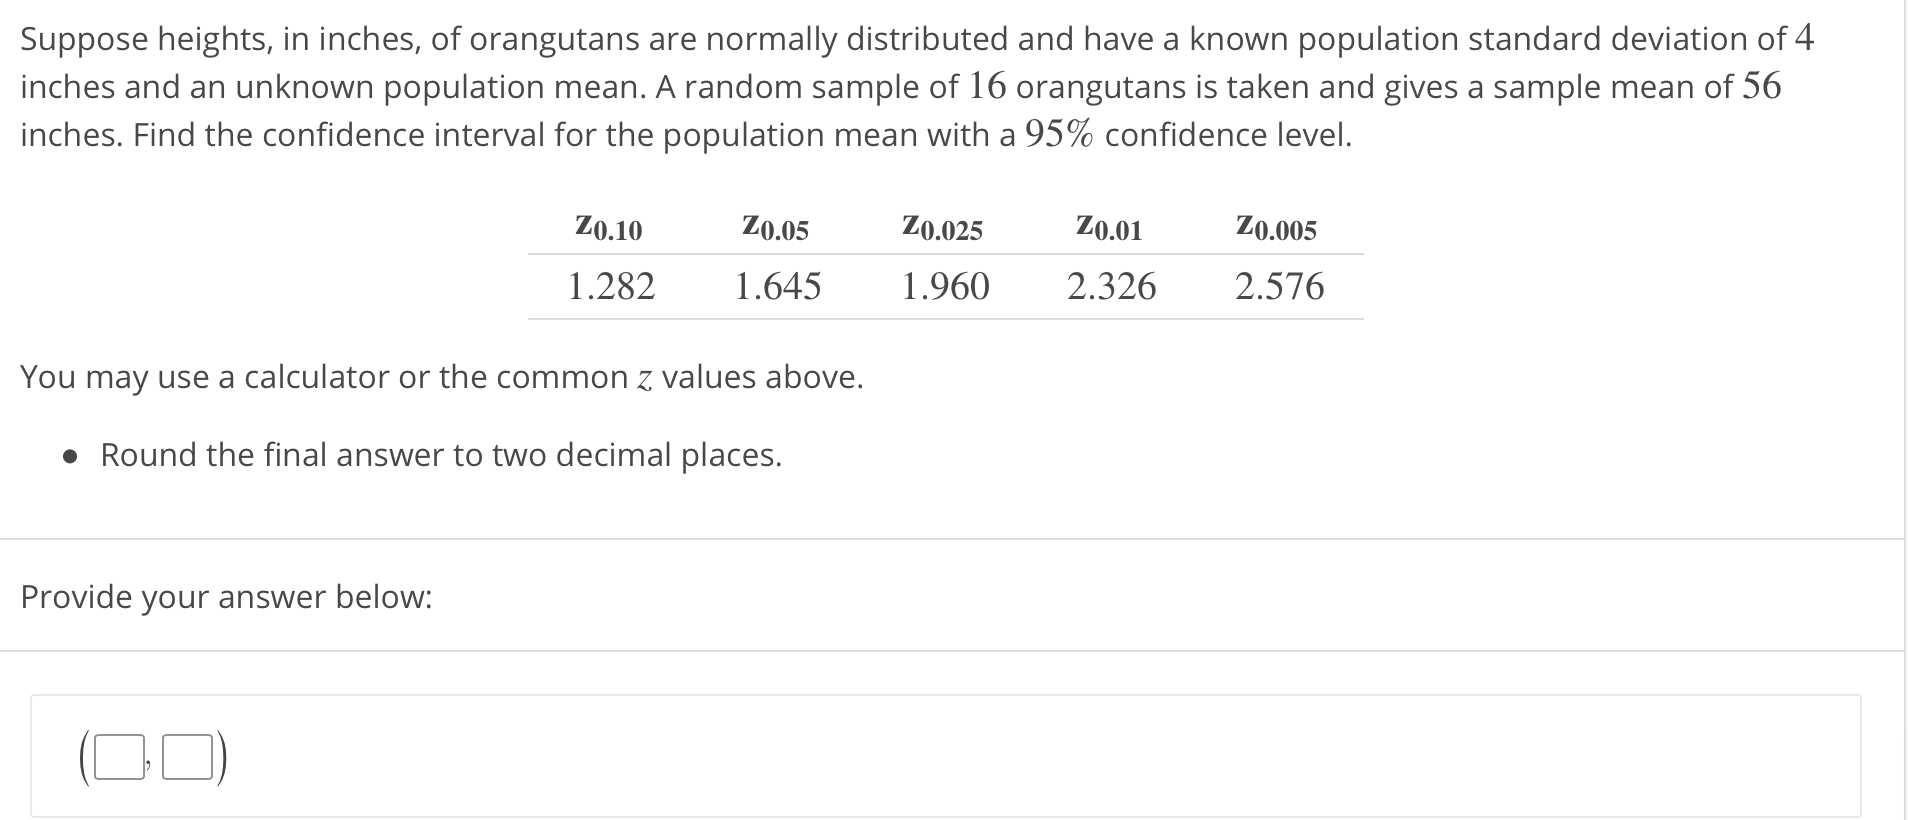 Suppose heights, in inches, of orangutans are normally distributed and have a known population standard deviation of 4
inches and an unknown population mean. A random sample of 16 orangutans is taken and gives a sample mean of 56
inches. Find the confidence interval for the population mean with a 95% confidence level.
Z0.10Z0.05Z0.025 Z0.0 Z0.005
1.282 .645 1.960 2.326 2.576
You may use a calculator or the common z values above.
Round the final answer to two decimal places.
Provide your answer below
